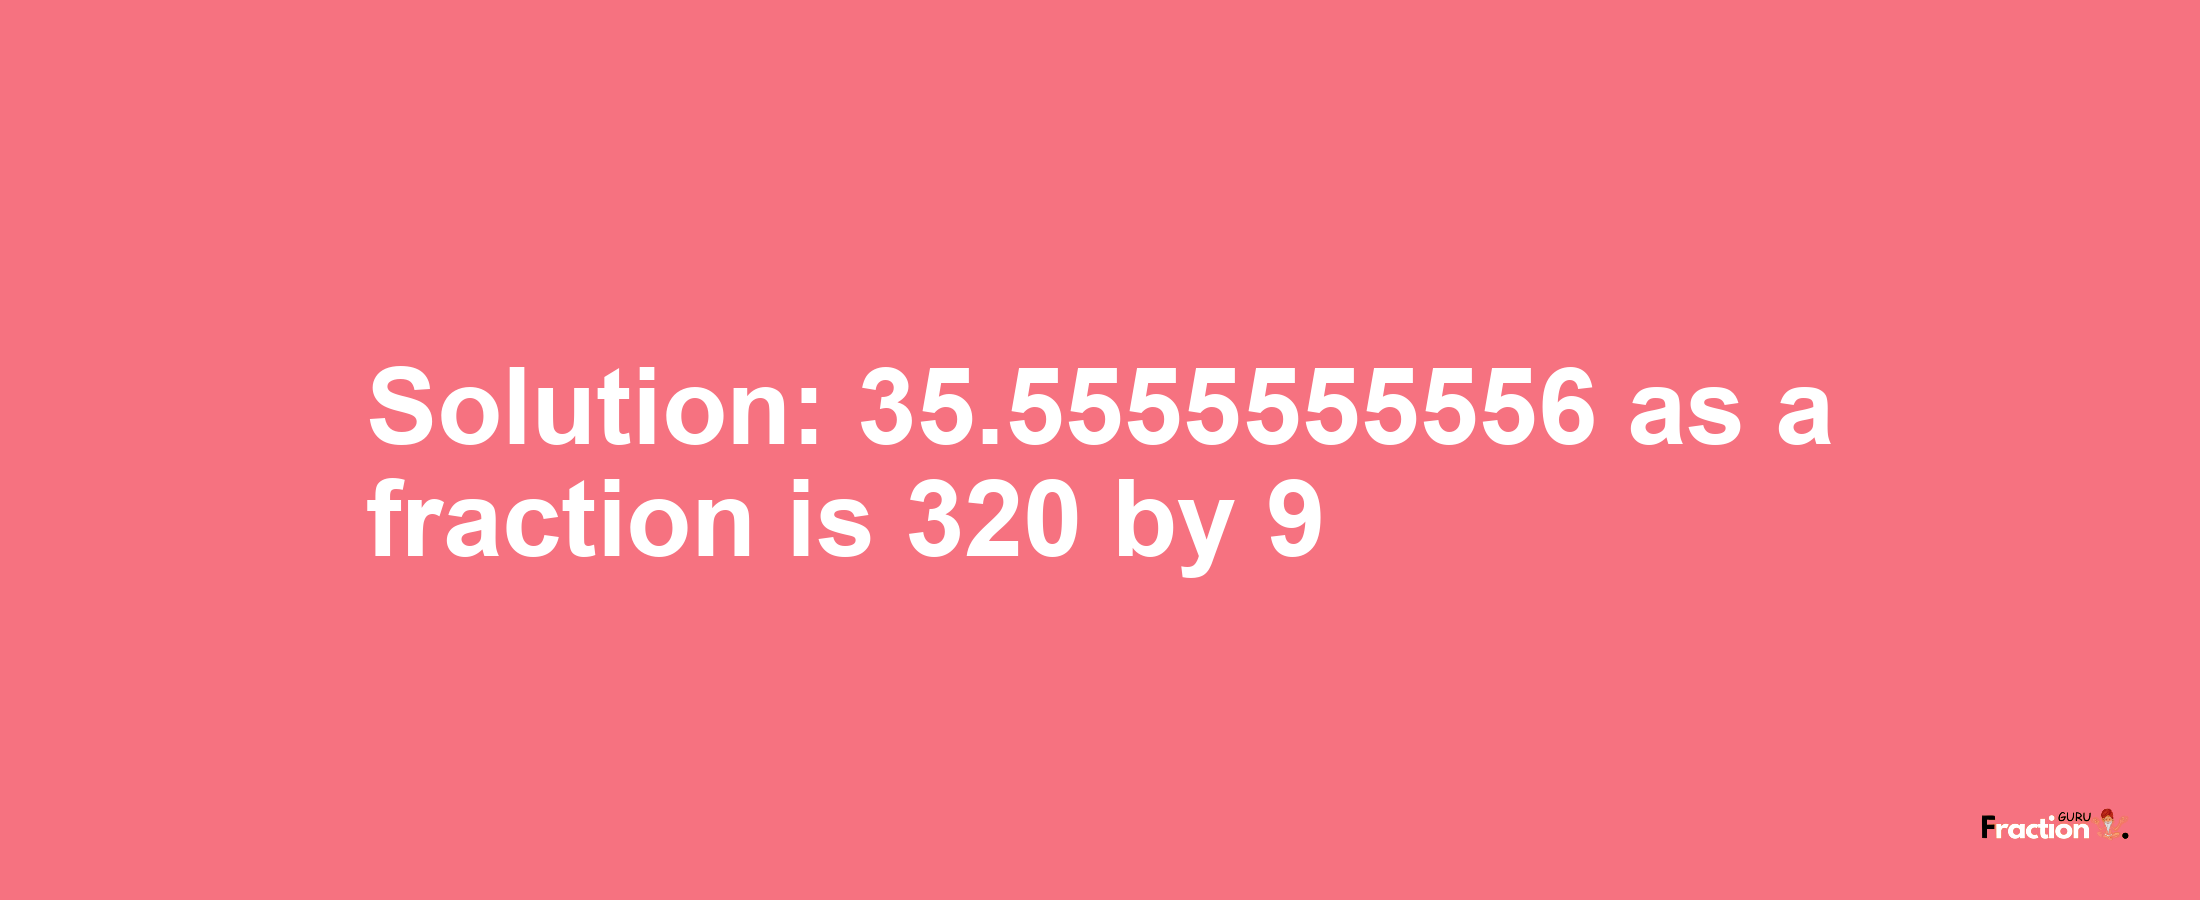 Solution:35.5555555556 as a fraction is 320/9